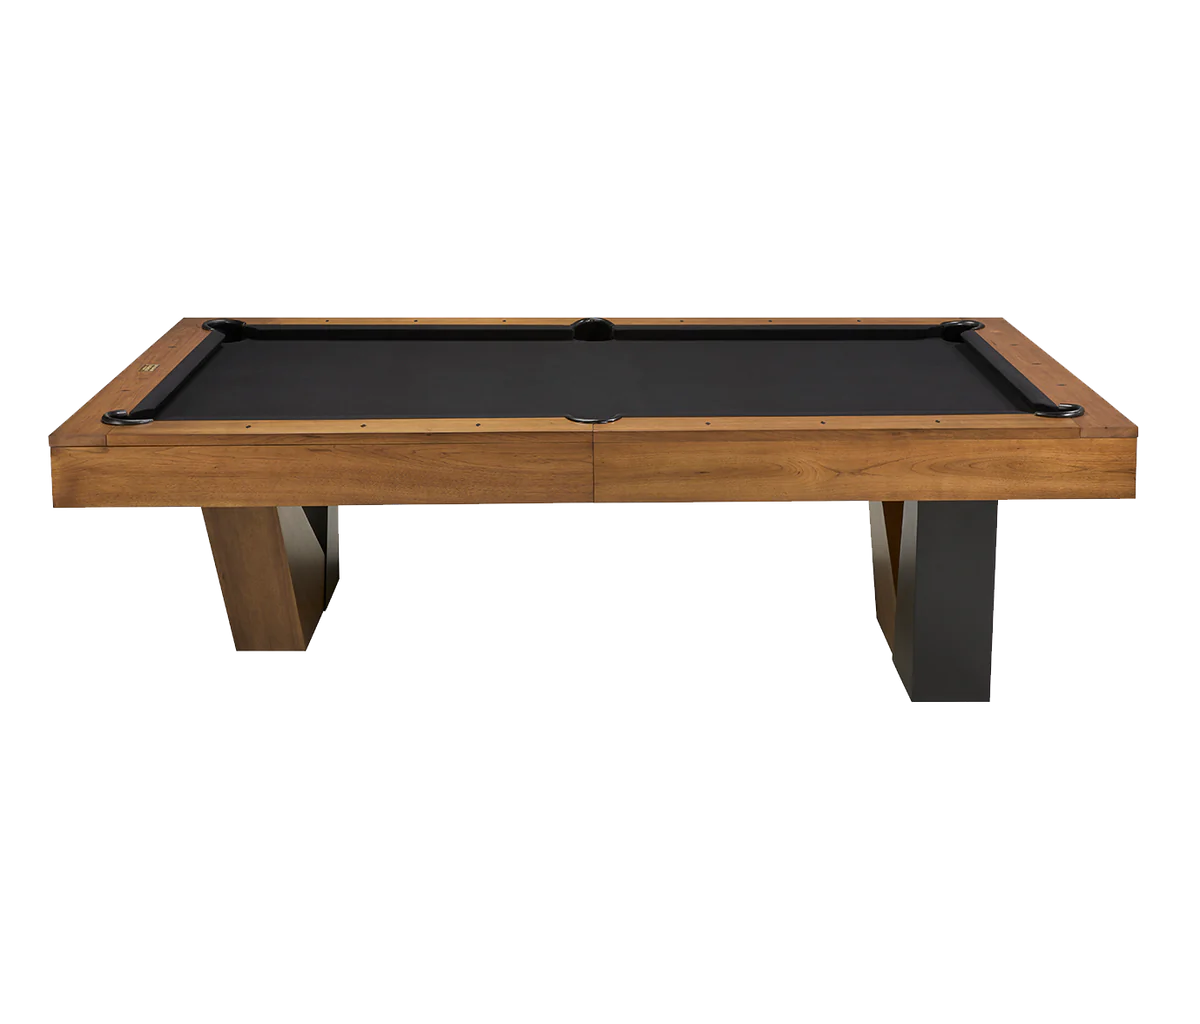 Length view of pool table 